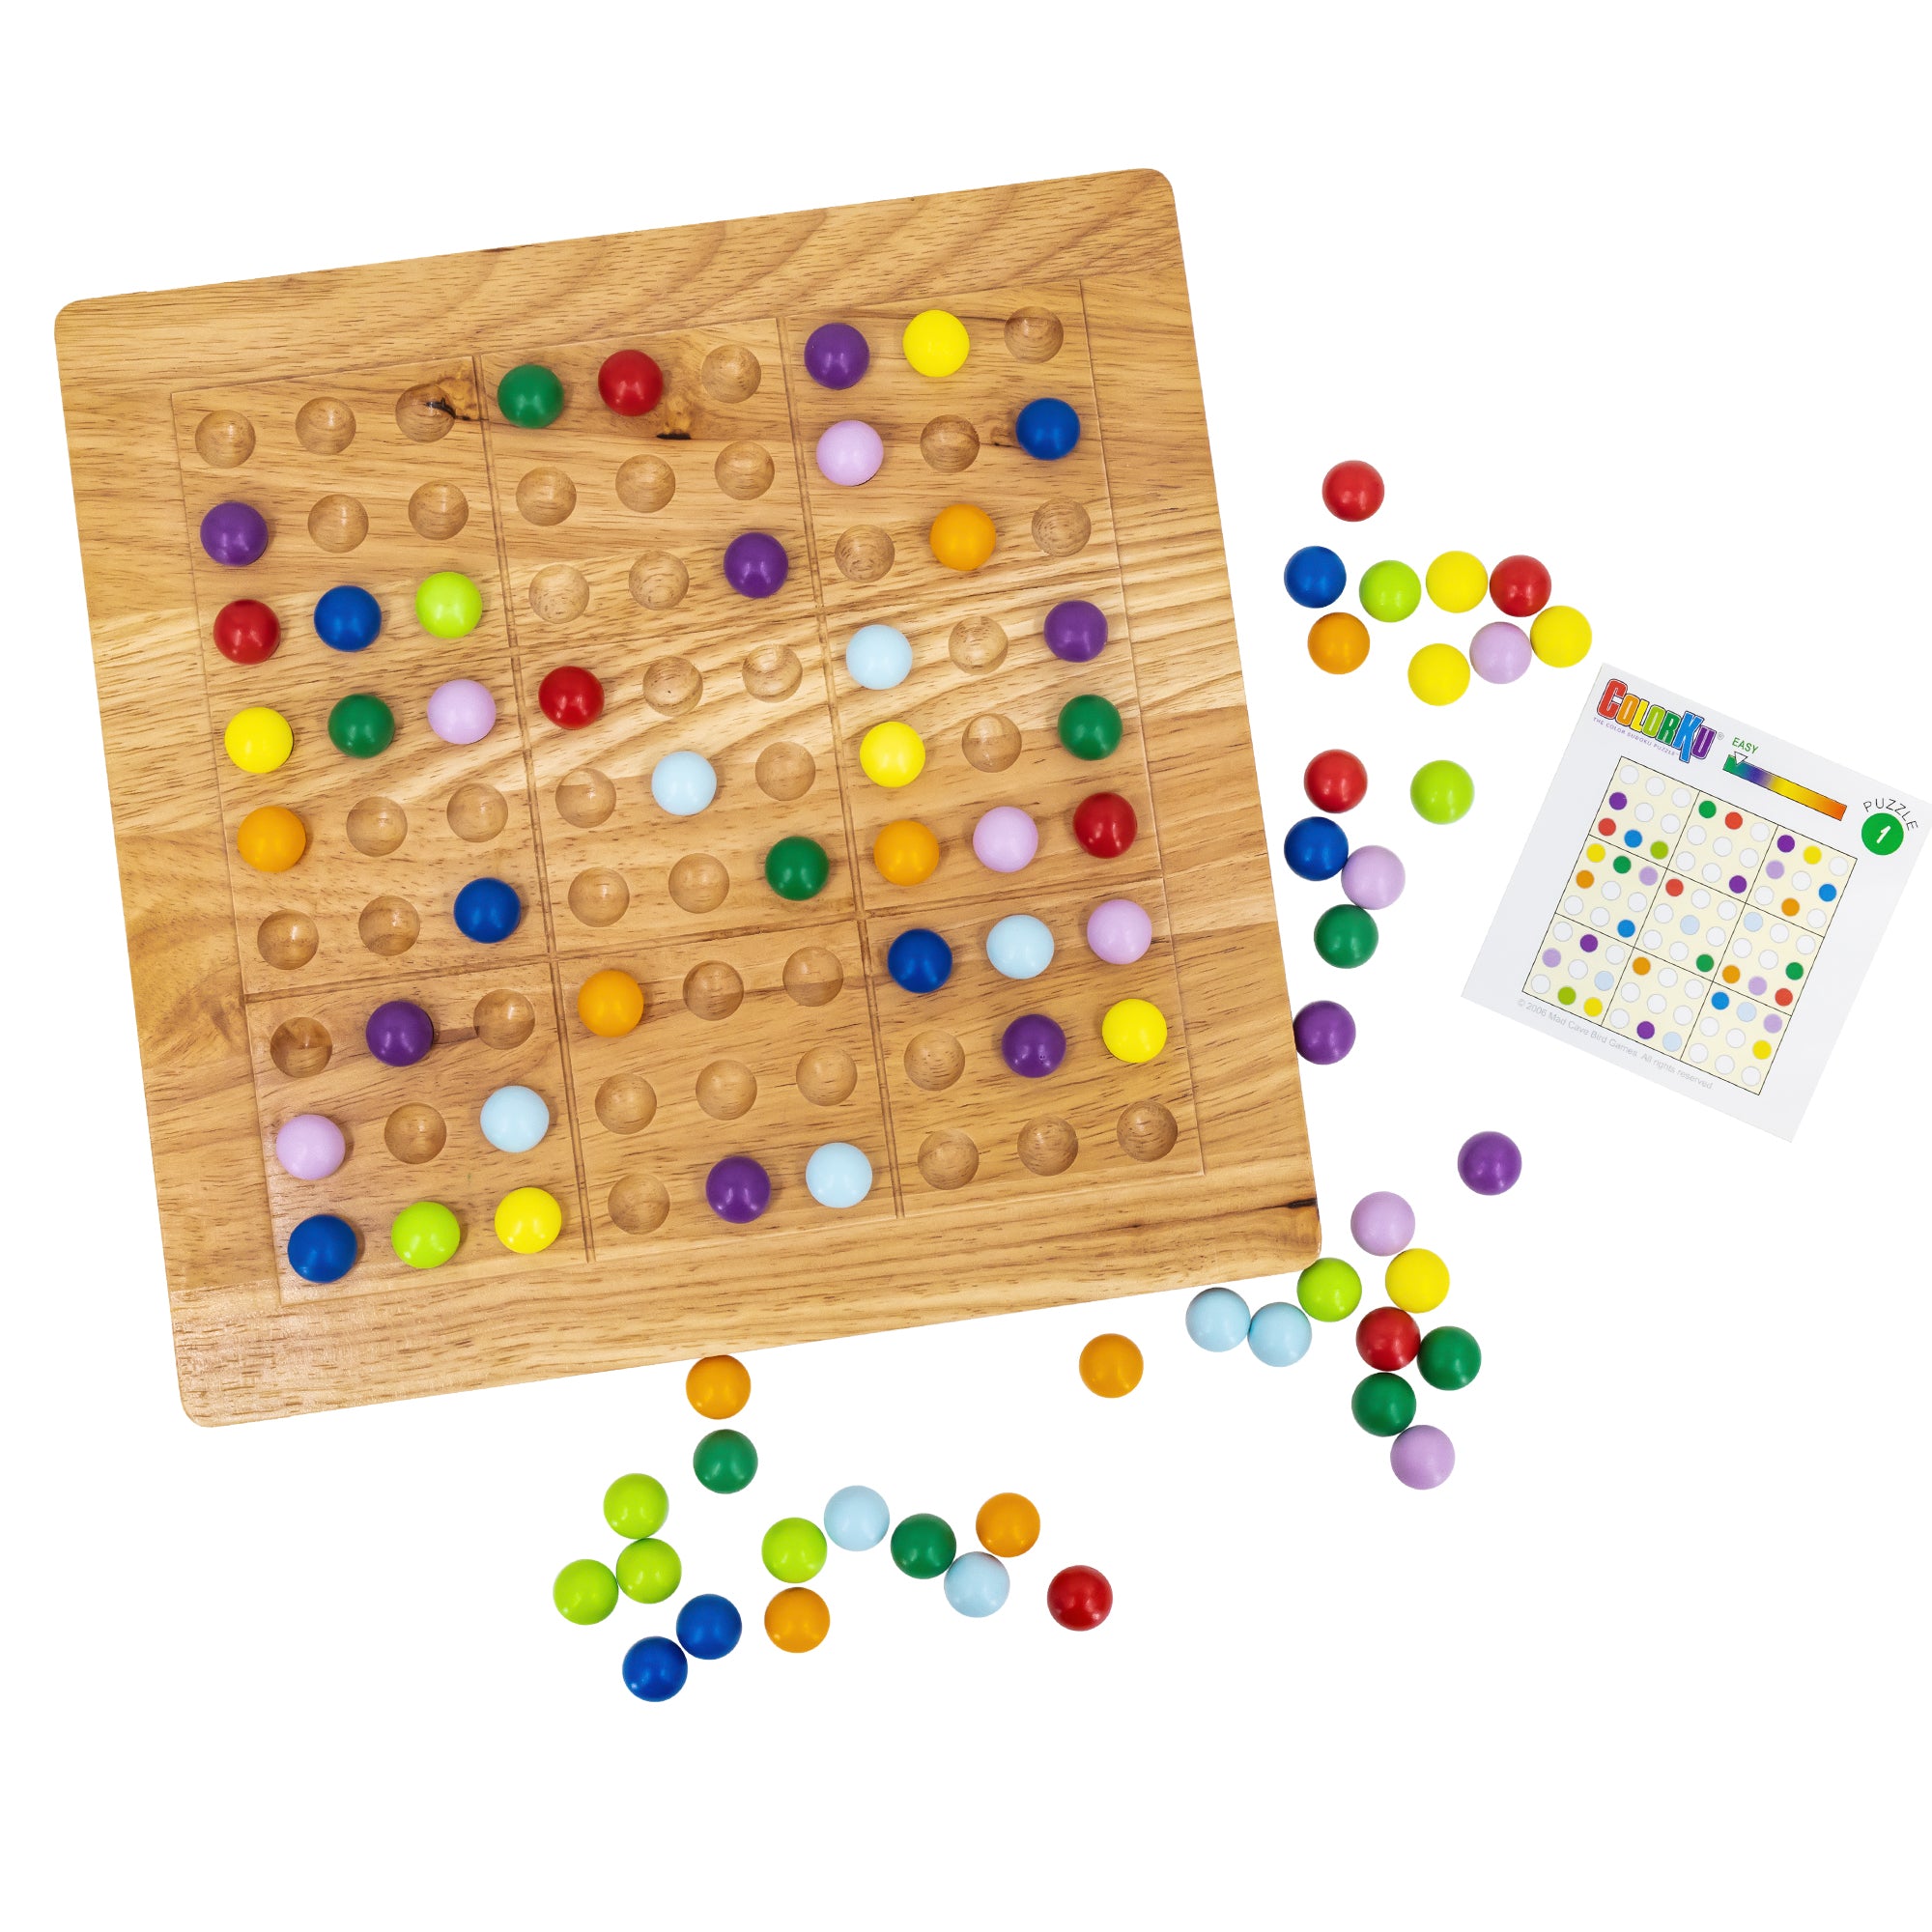 A layout of the ColorKu board and game pieces. The large wooden board has many ball pieces in place. To the right is a challenge card. All around the board are scattered ball pieces. The colored ball pieces are red, orange, yellow, bright green, dark green, light blue, dark blue, light purple, and dark purple.